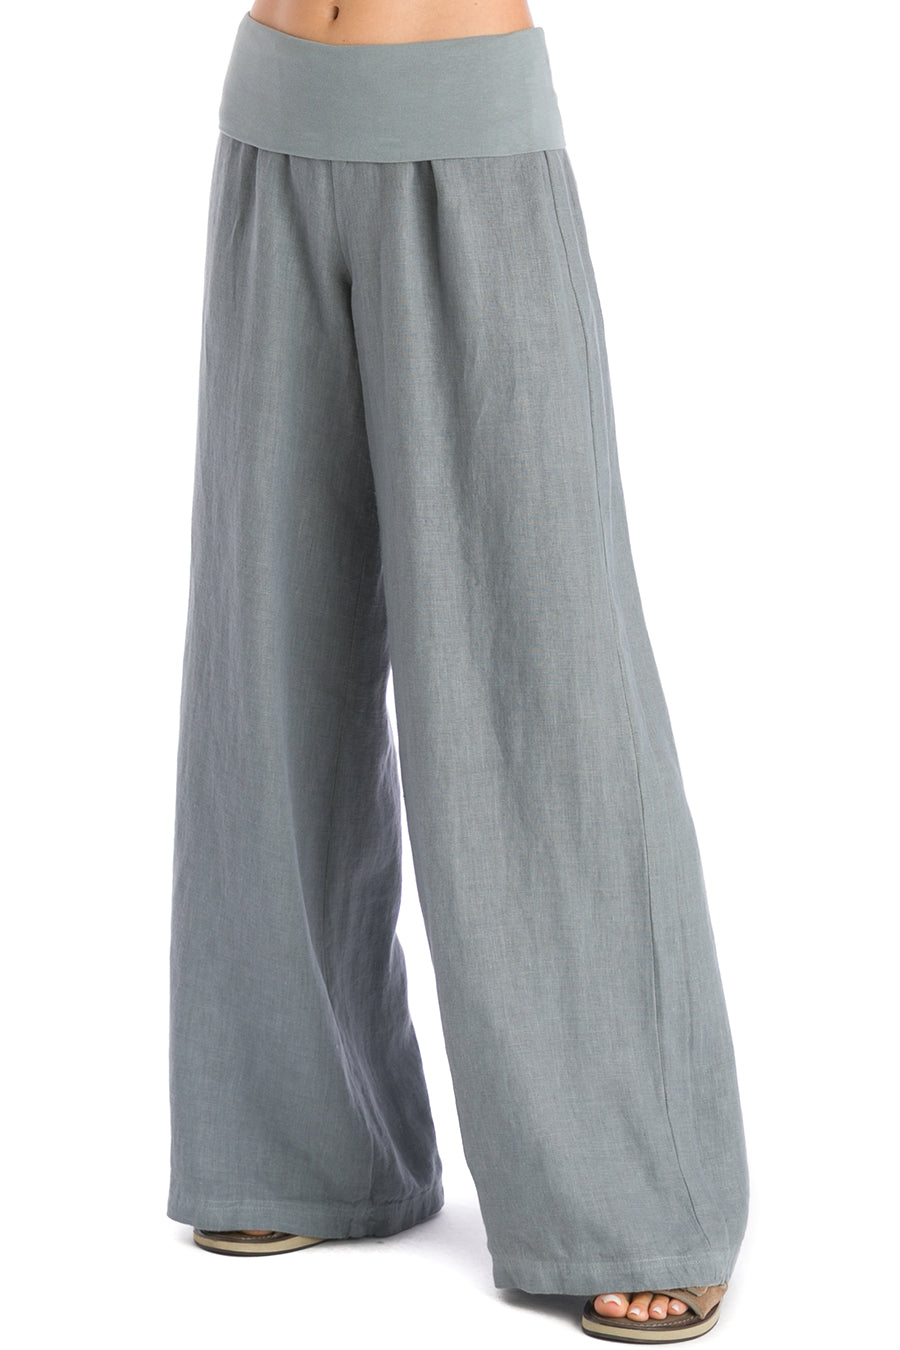 Hard Tail Forever Heavy Linen Rolldown Sweeper Pants - Glass